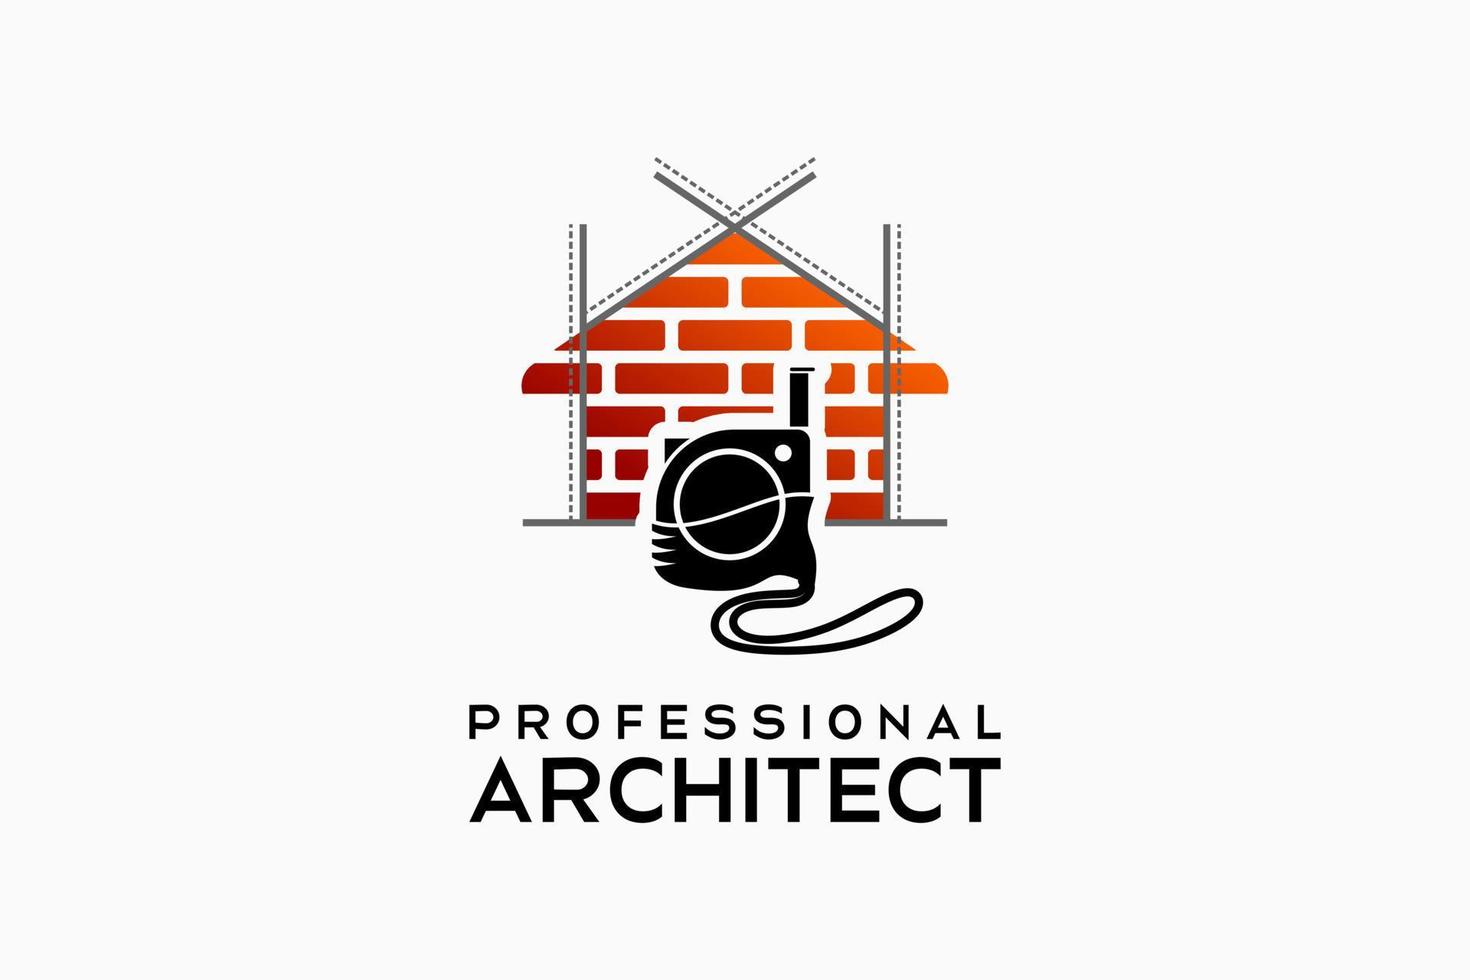 Architect or building designer logo design, silhouette of a roll meter with a brick patterned house icon. Modern vector illustration